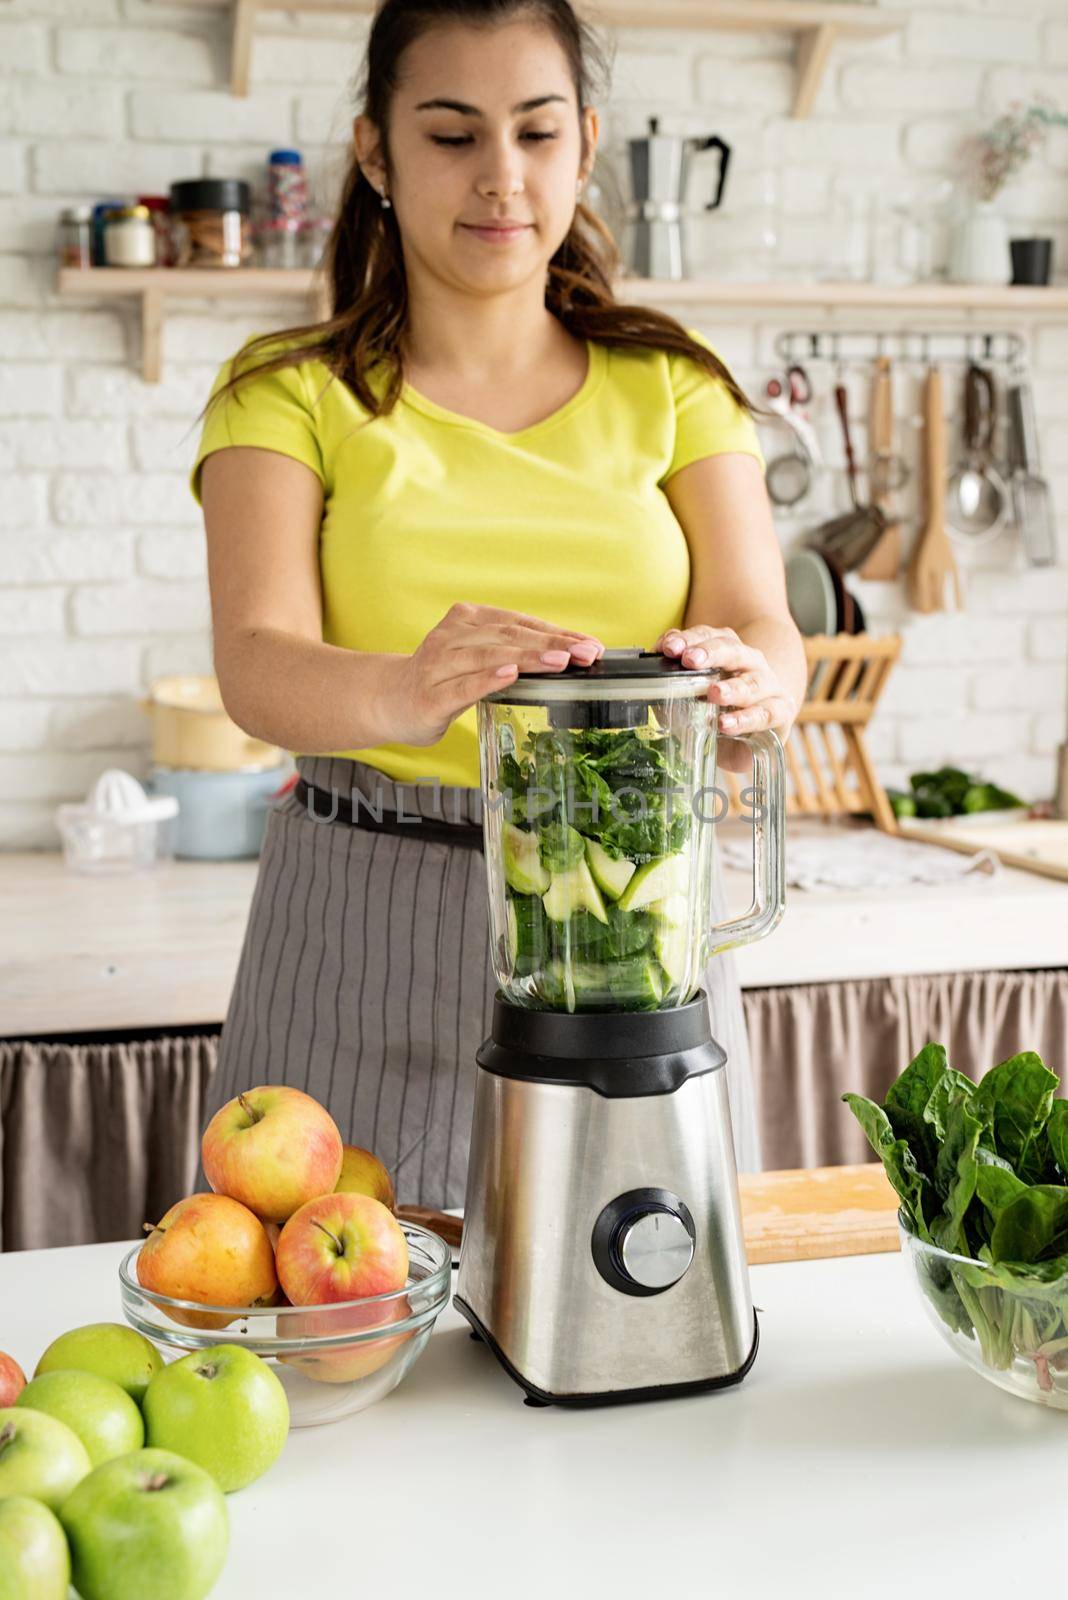 Preparing healthy foods. Healthy eating and dieting. Young brunette woman making green smoothie at home kitchen